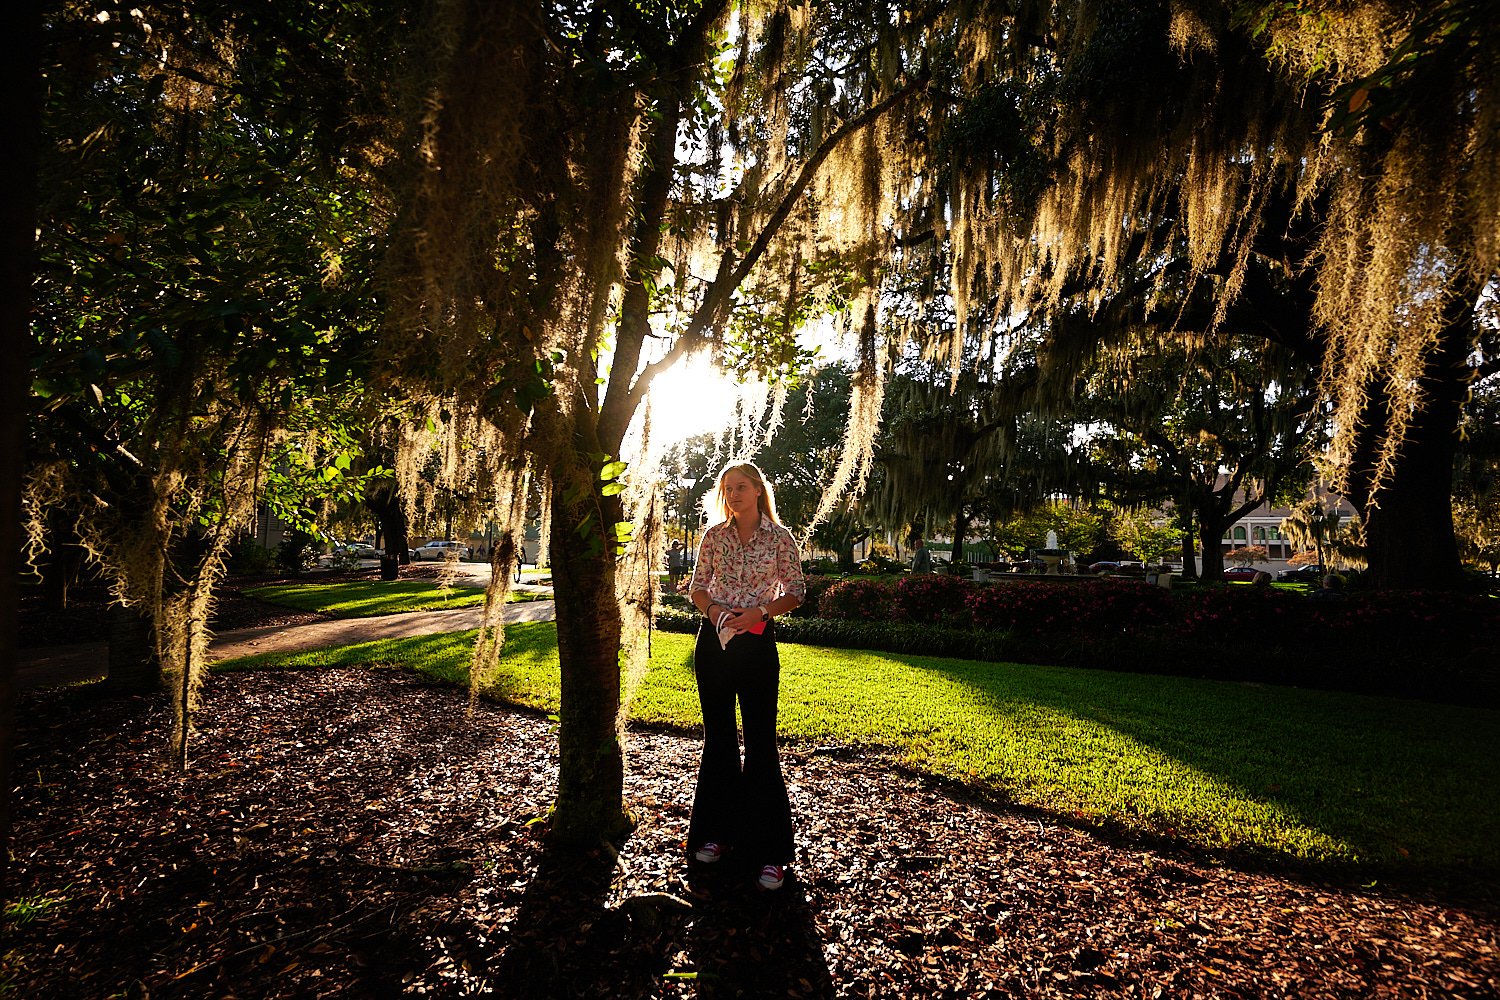  Savannah, Georgia, USA - OCTOBER 9TH 2021: a teenage girl is posing in the streets of Savannah on a warm autumn evening lit by the setting sun. The 16-year old had long blond hair and wore flare jeans 